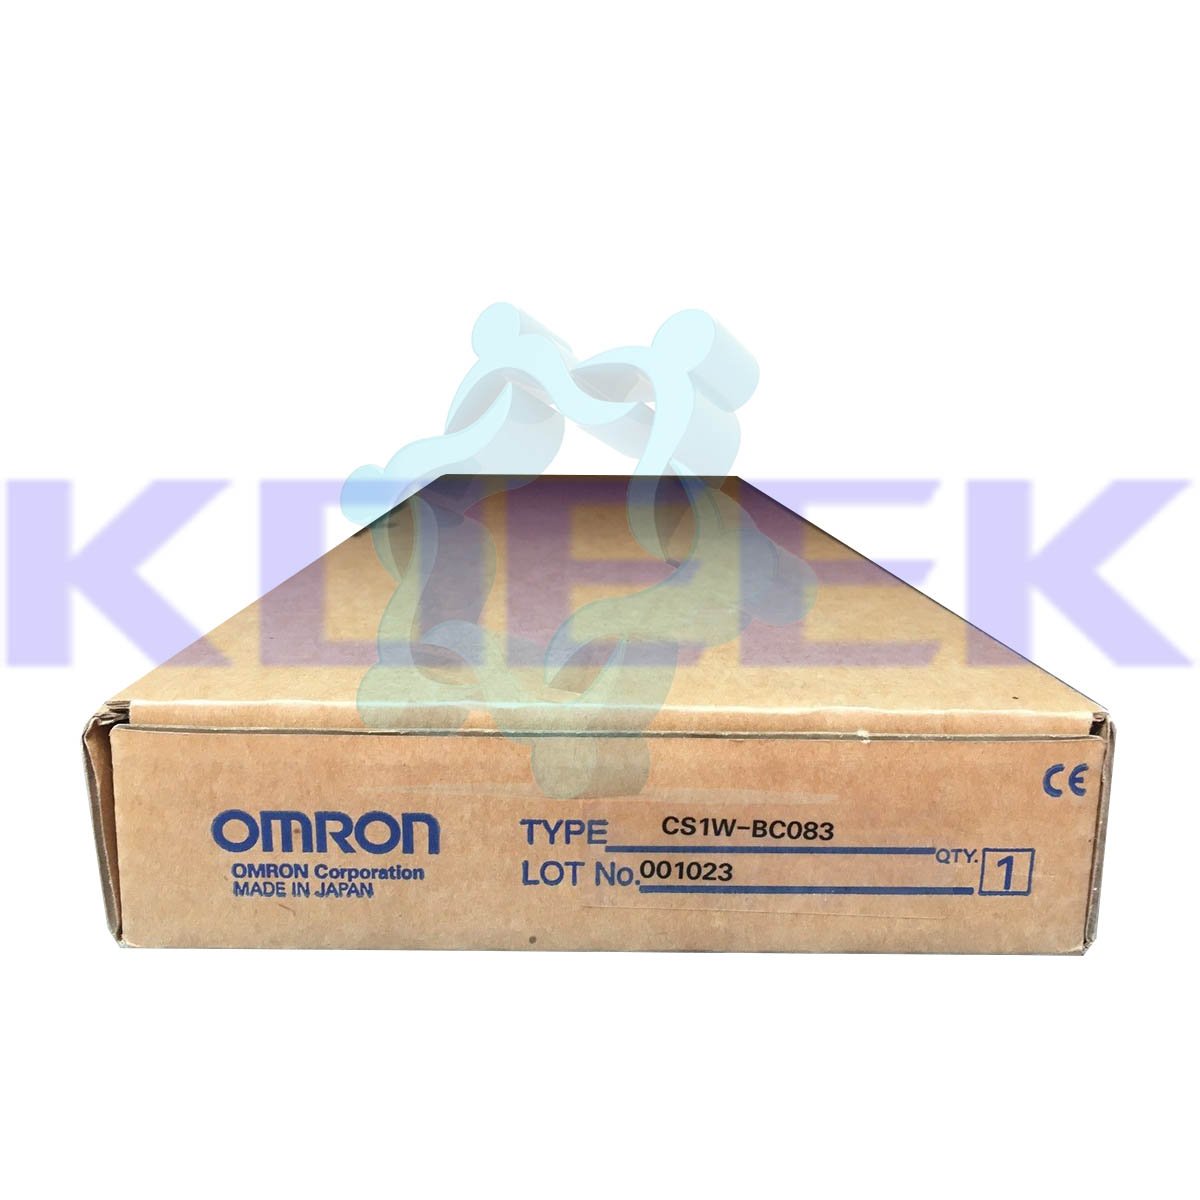 CS1W-BC083 KOEED 201-500, 80%, import_2020_10_10_031751, Omron, Other